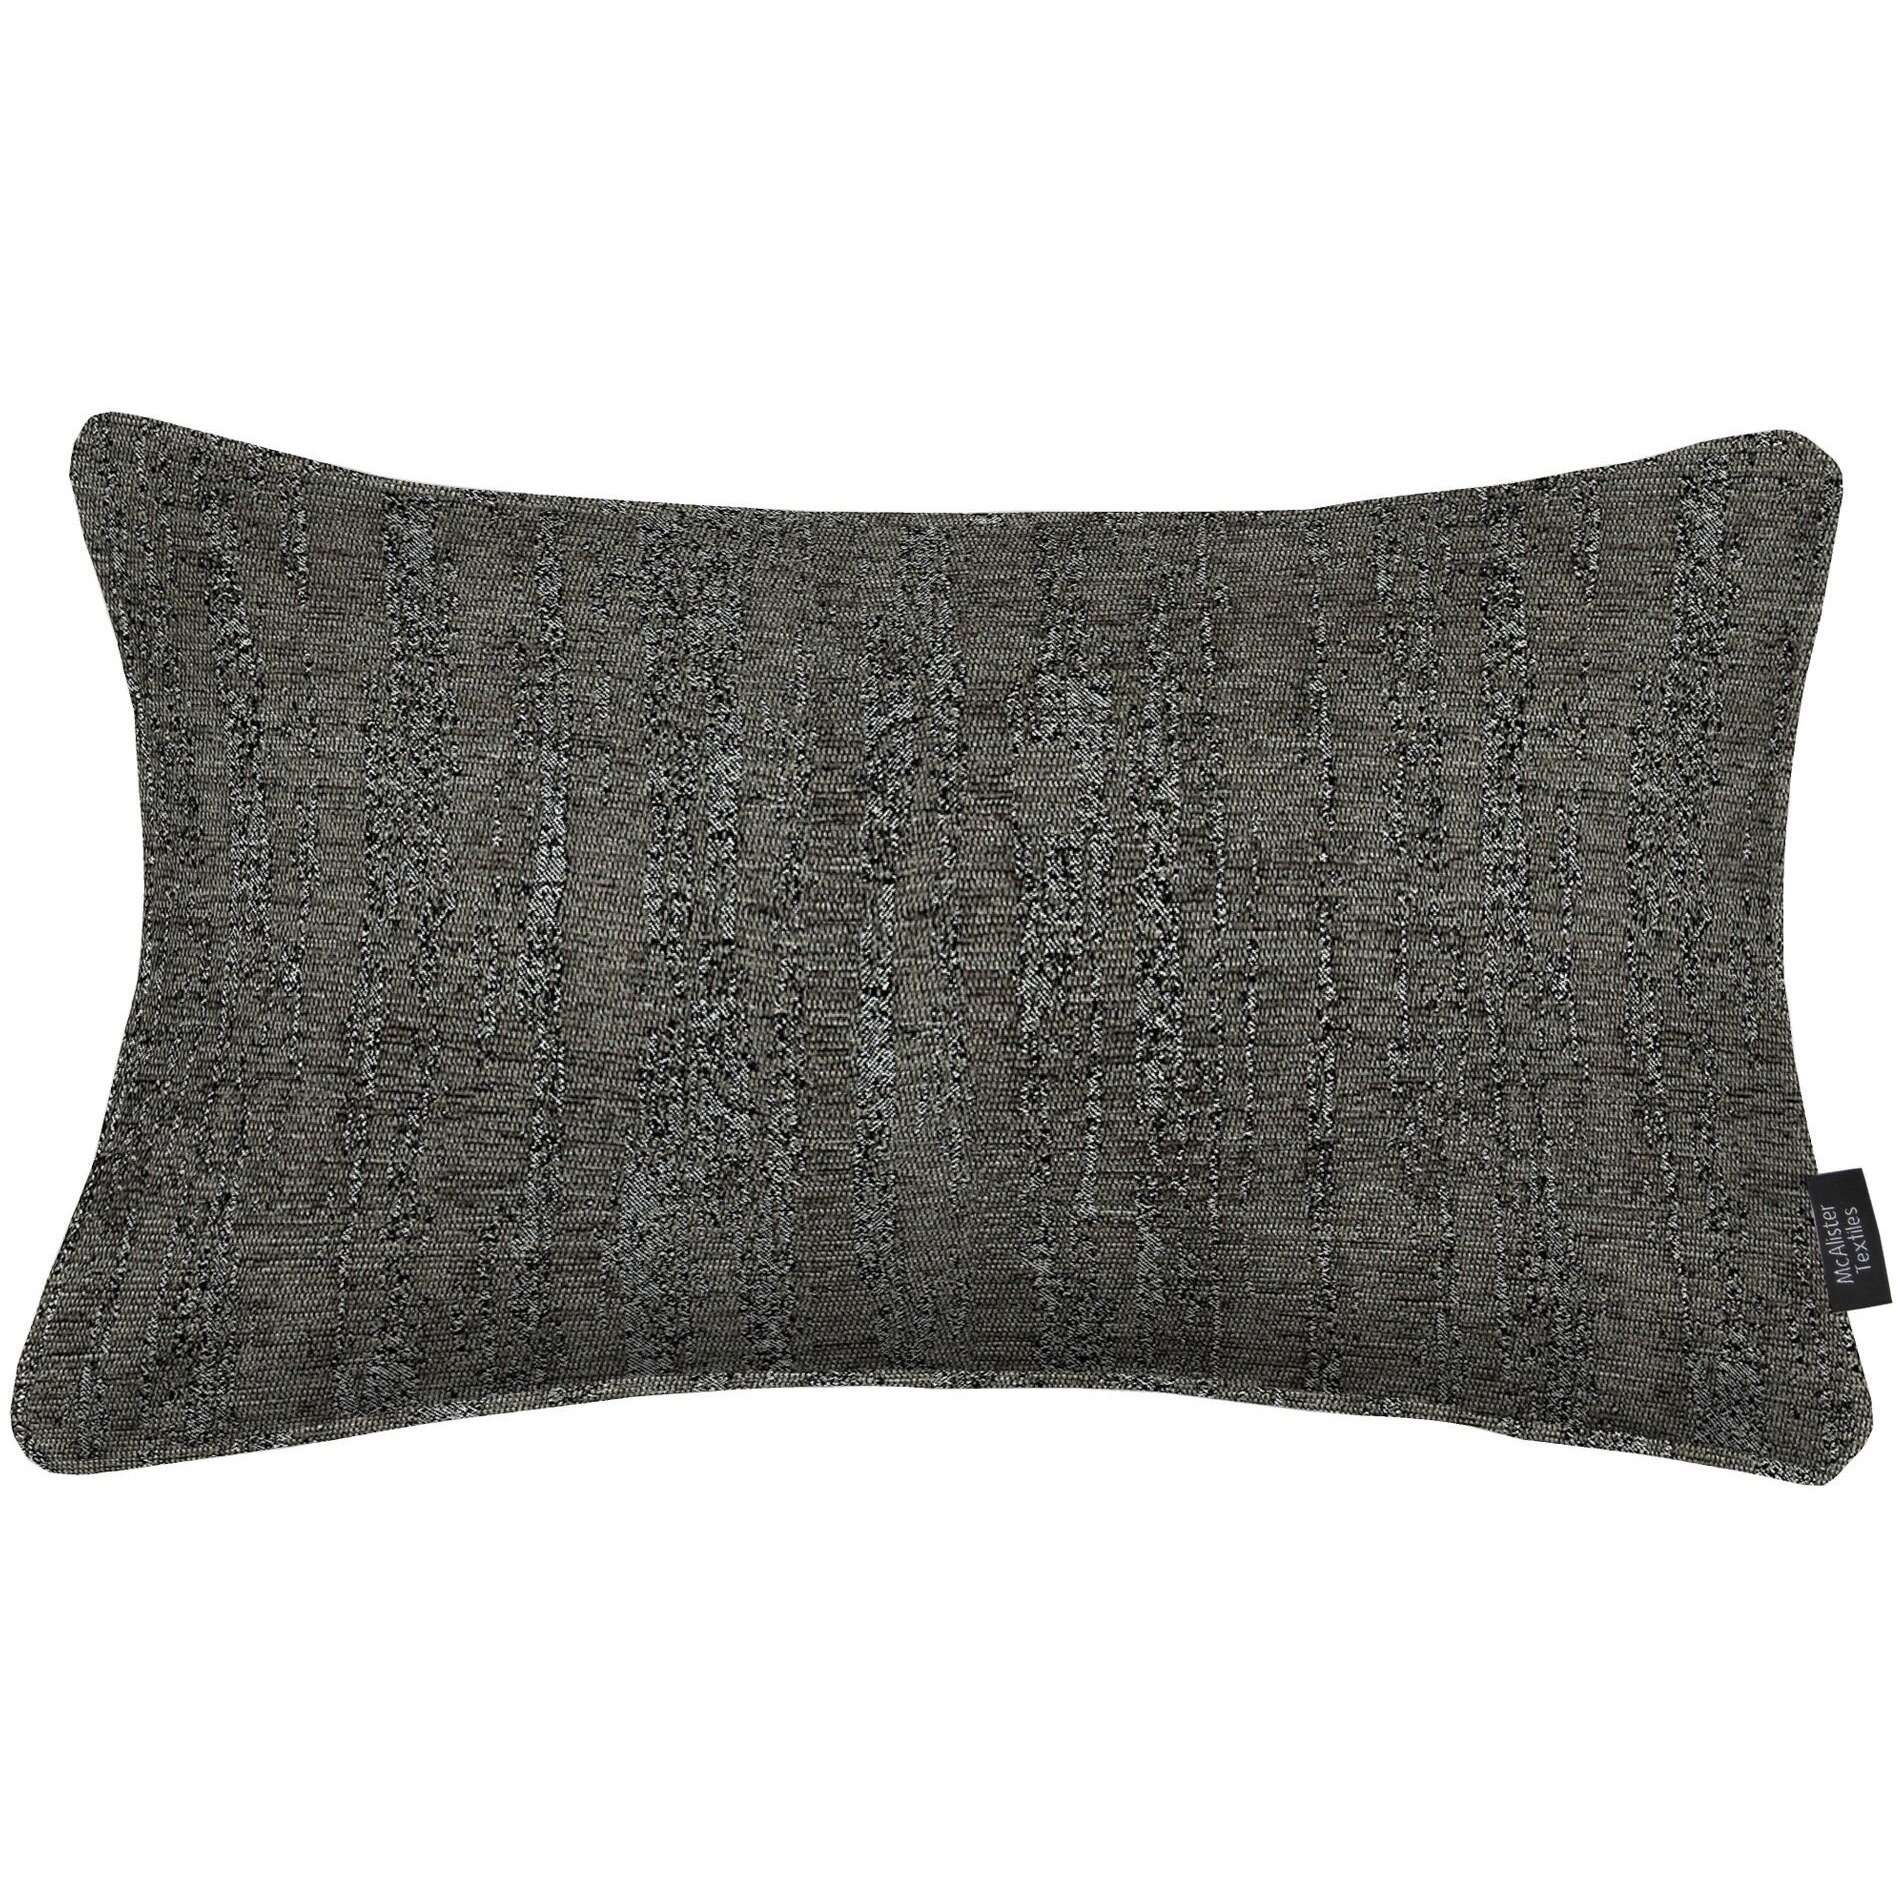 McAlister Textiles Textured Chenille Charcoal Grey Pillow Pillow Cover Only 50cm x 30cm 